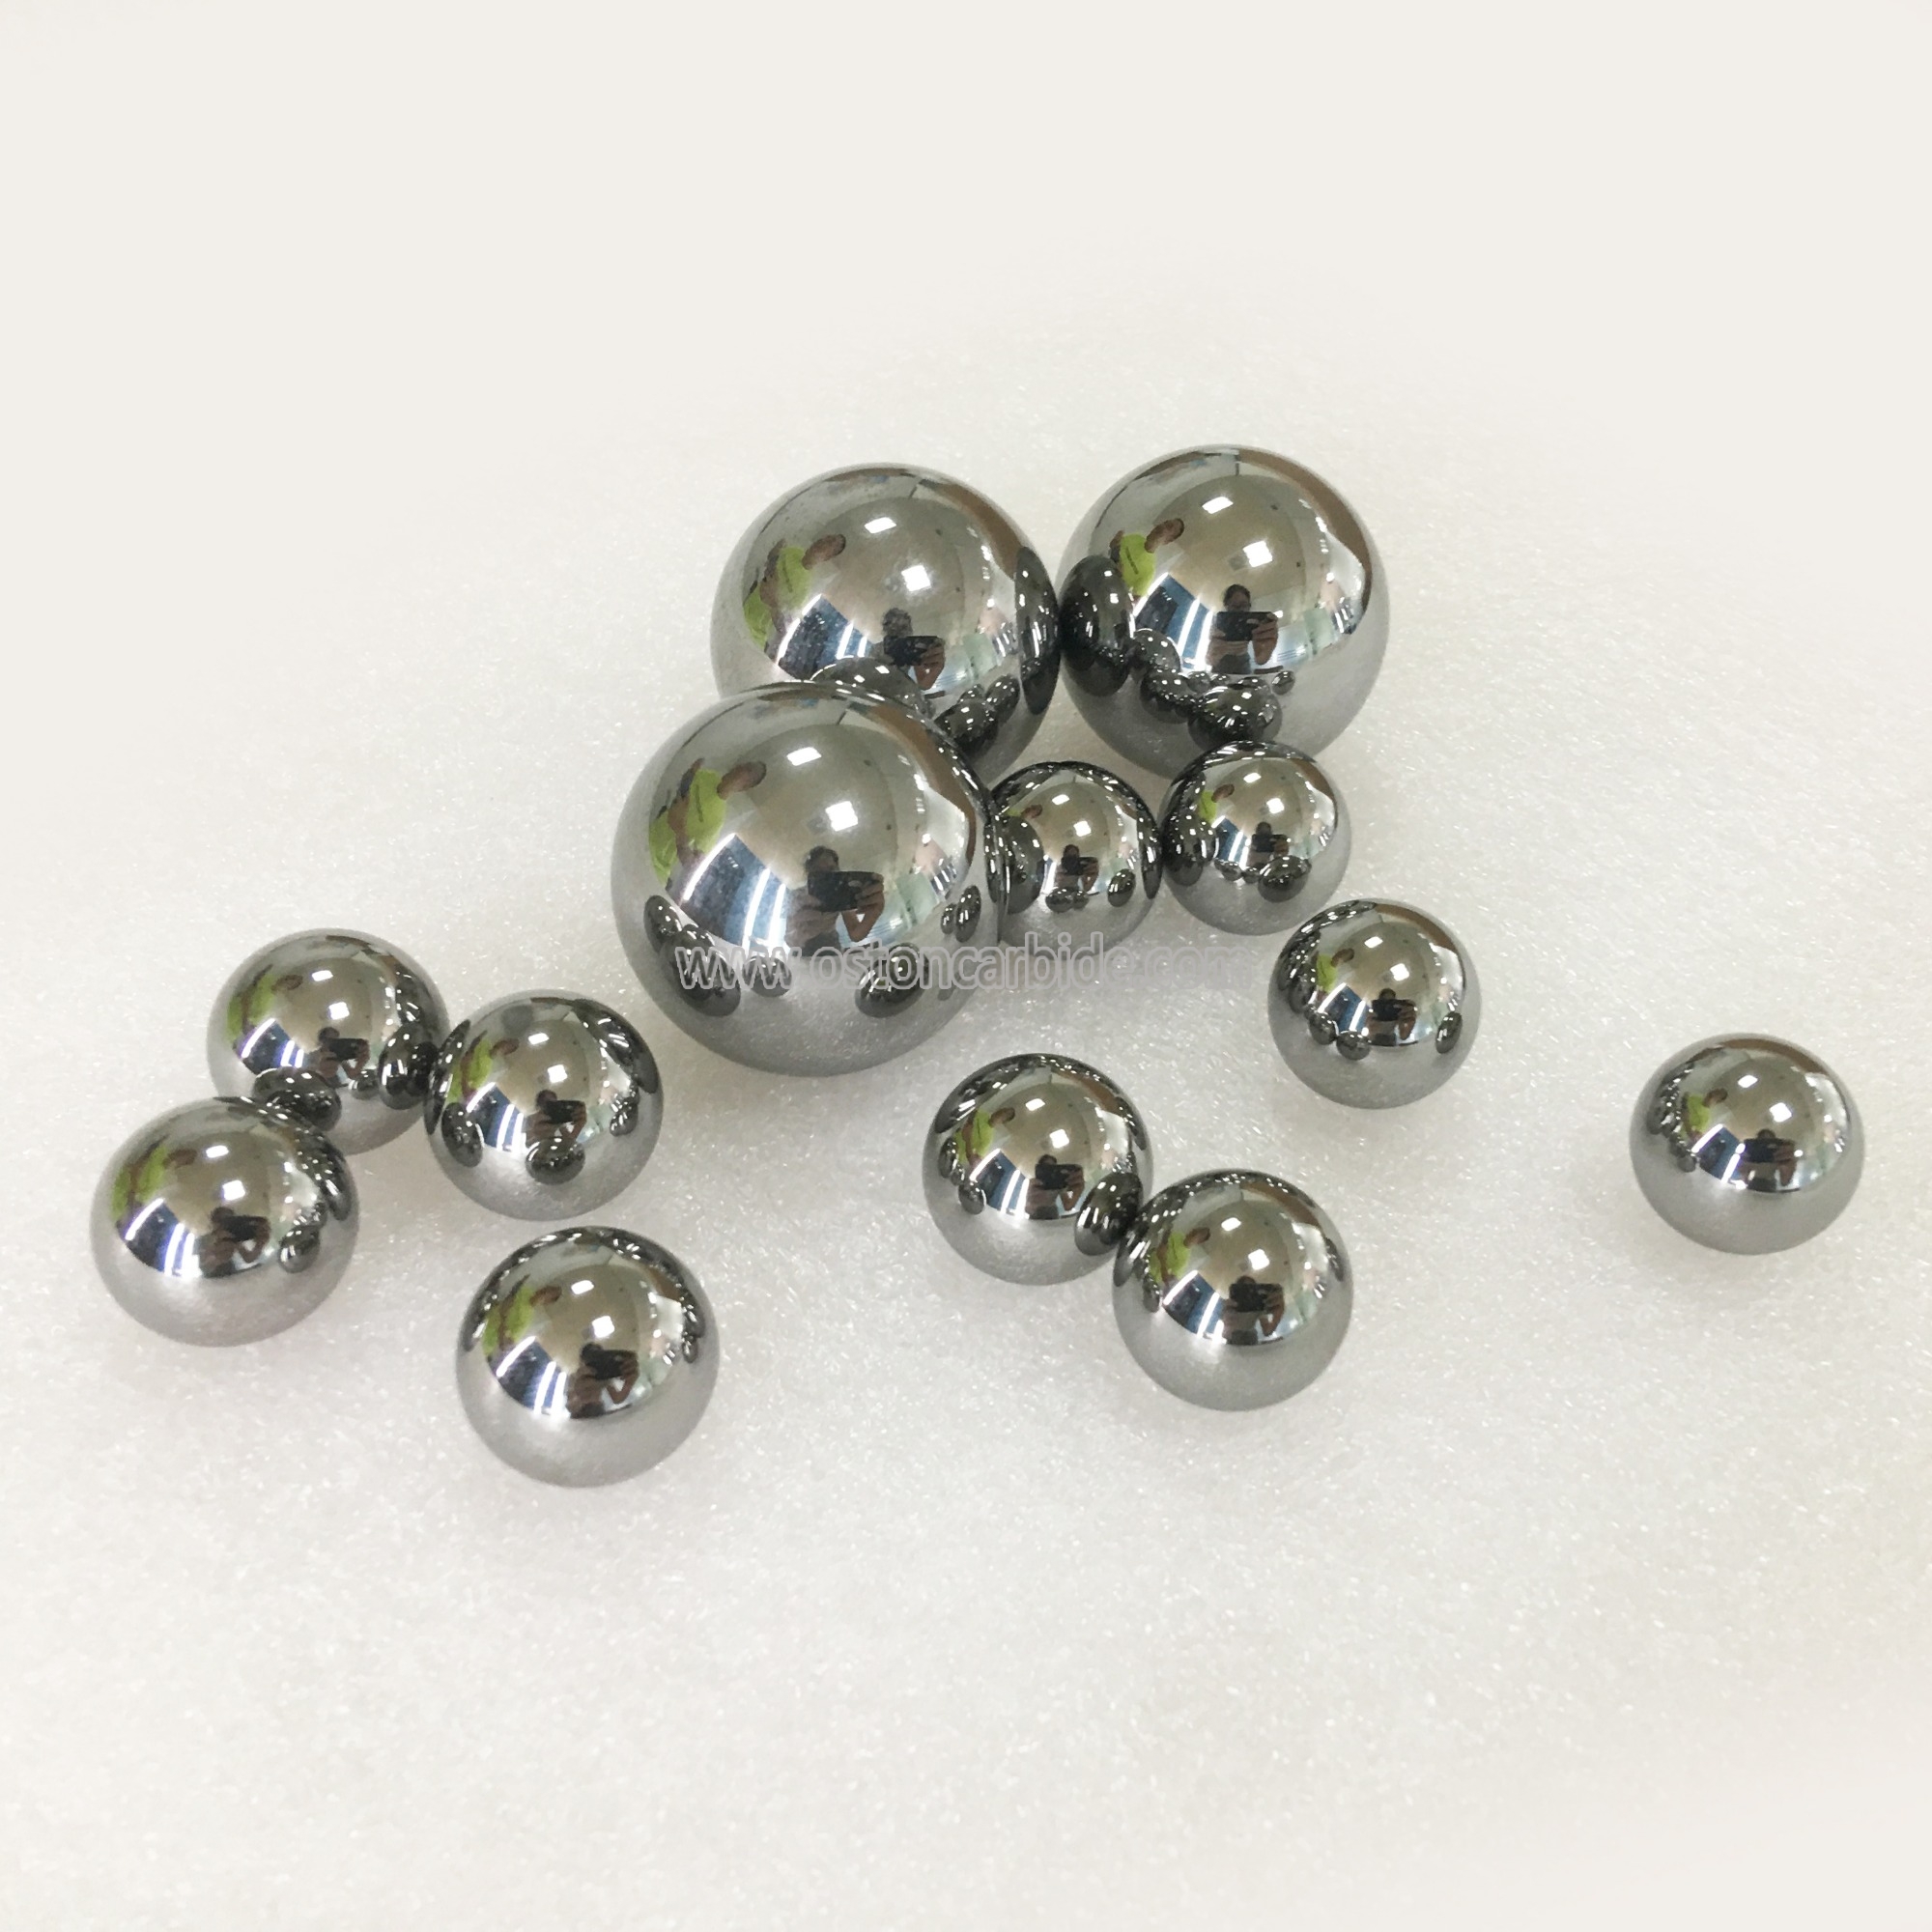 Polished Tungsten Carbide Spheres